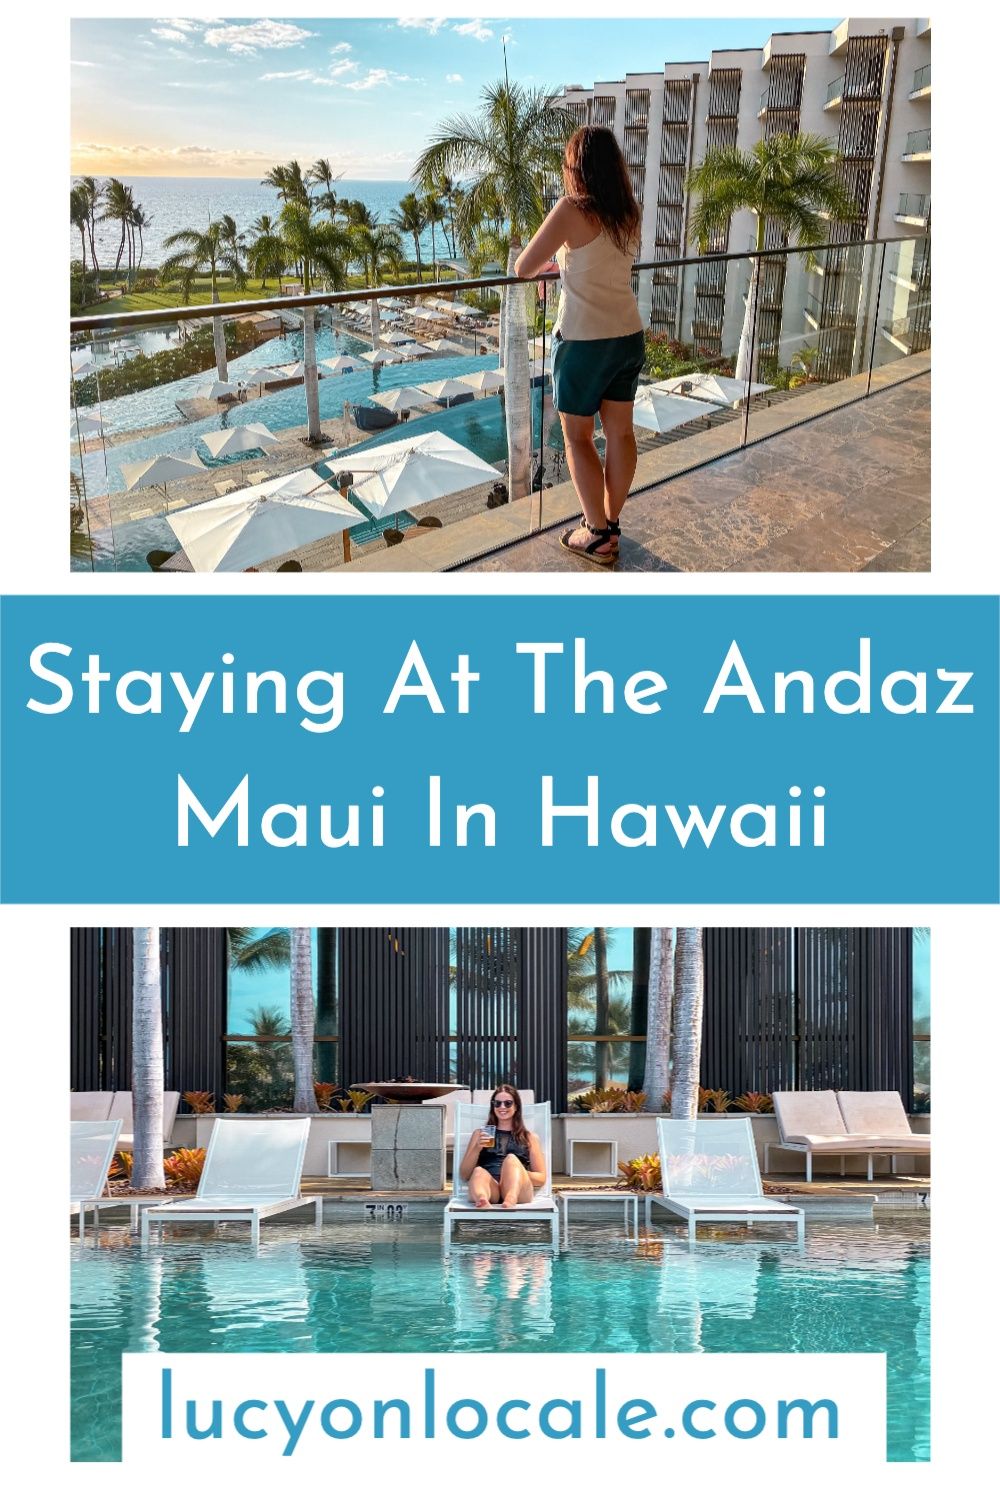 My stay at the Andaz Maui in Hawaii